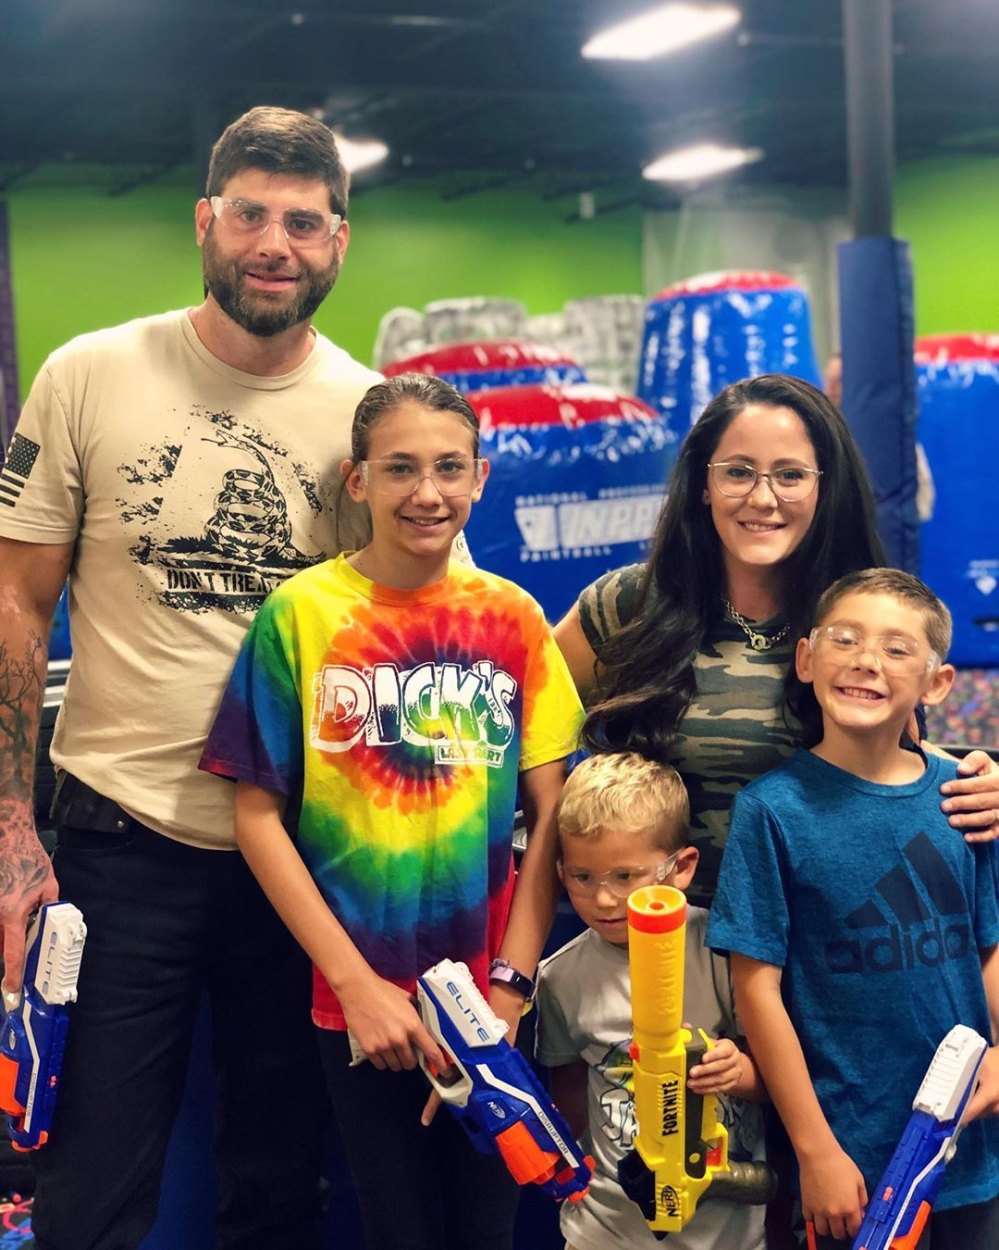 Jenelle Evans and David Eason Celebrate Her Son Jace’s 10th Birthday